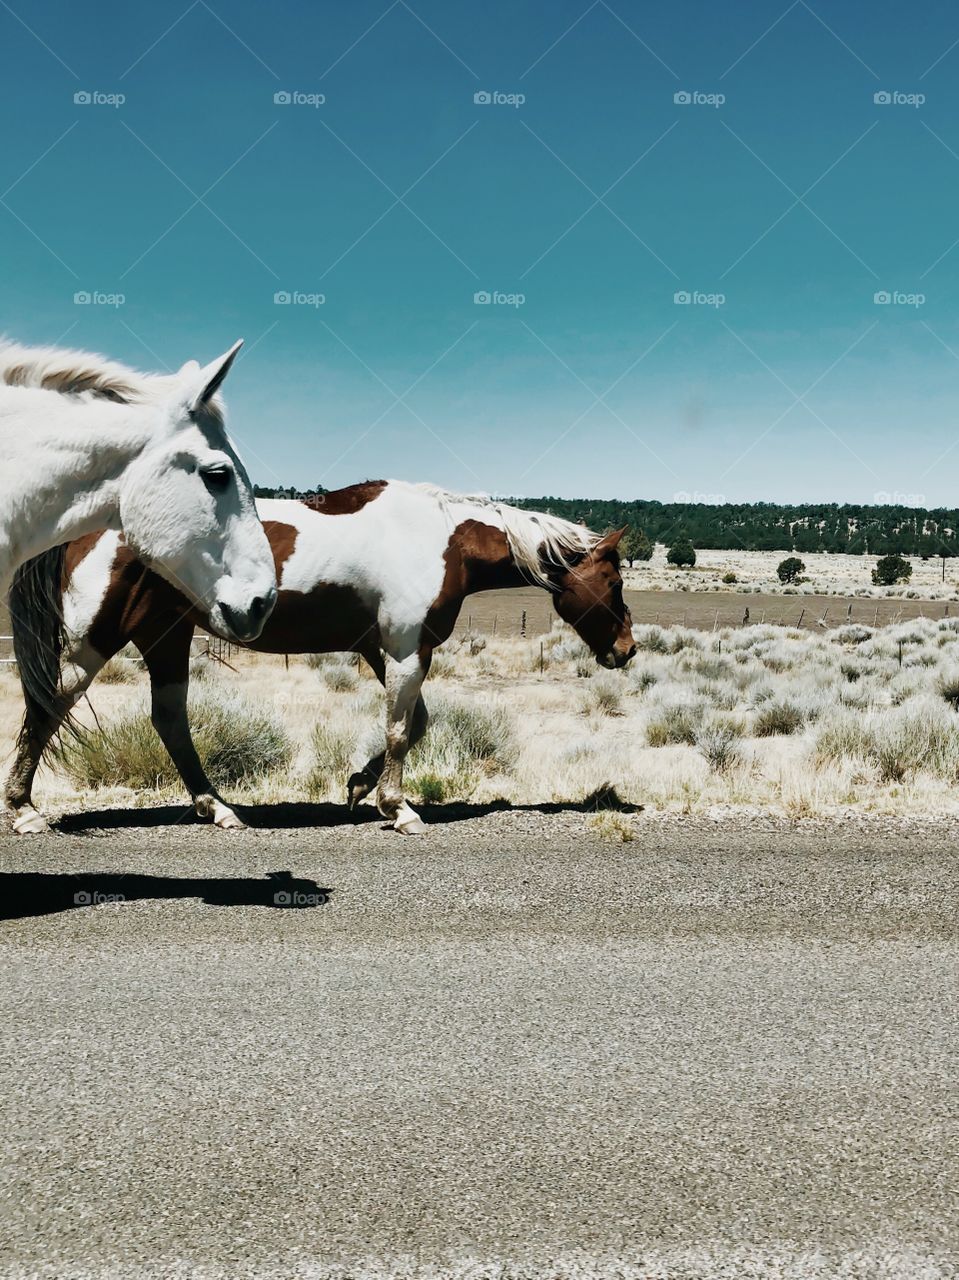 Horses walking down the road in New Mexico